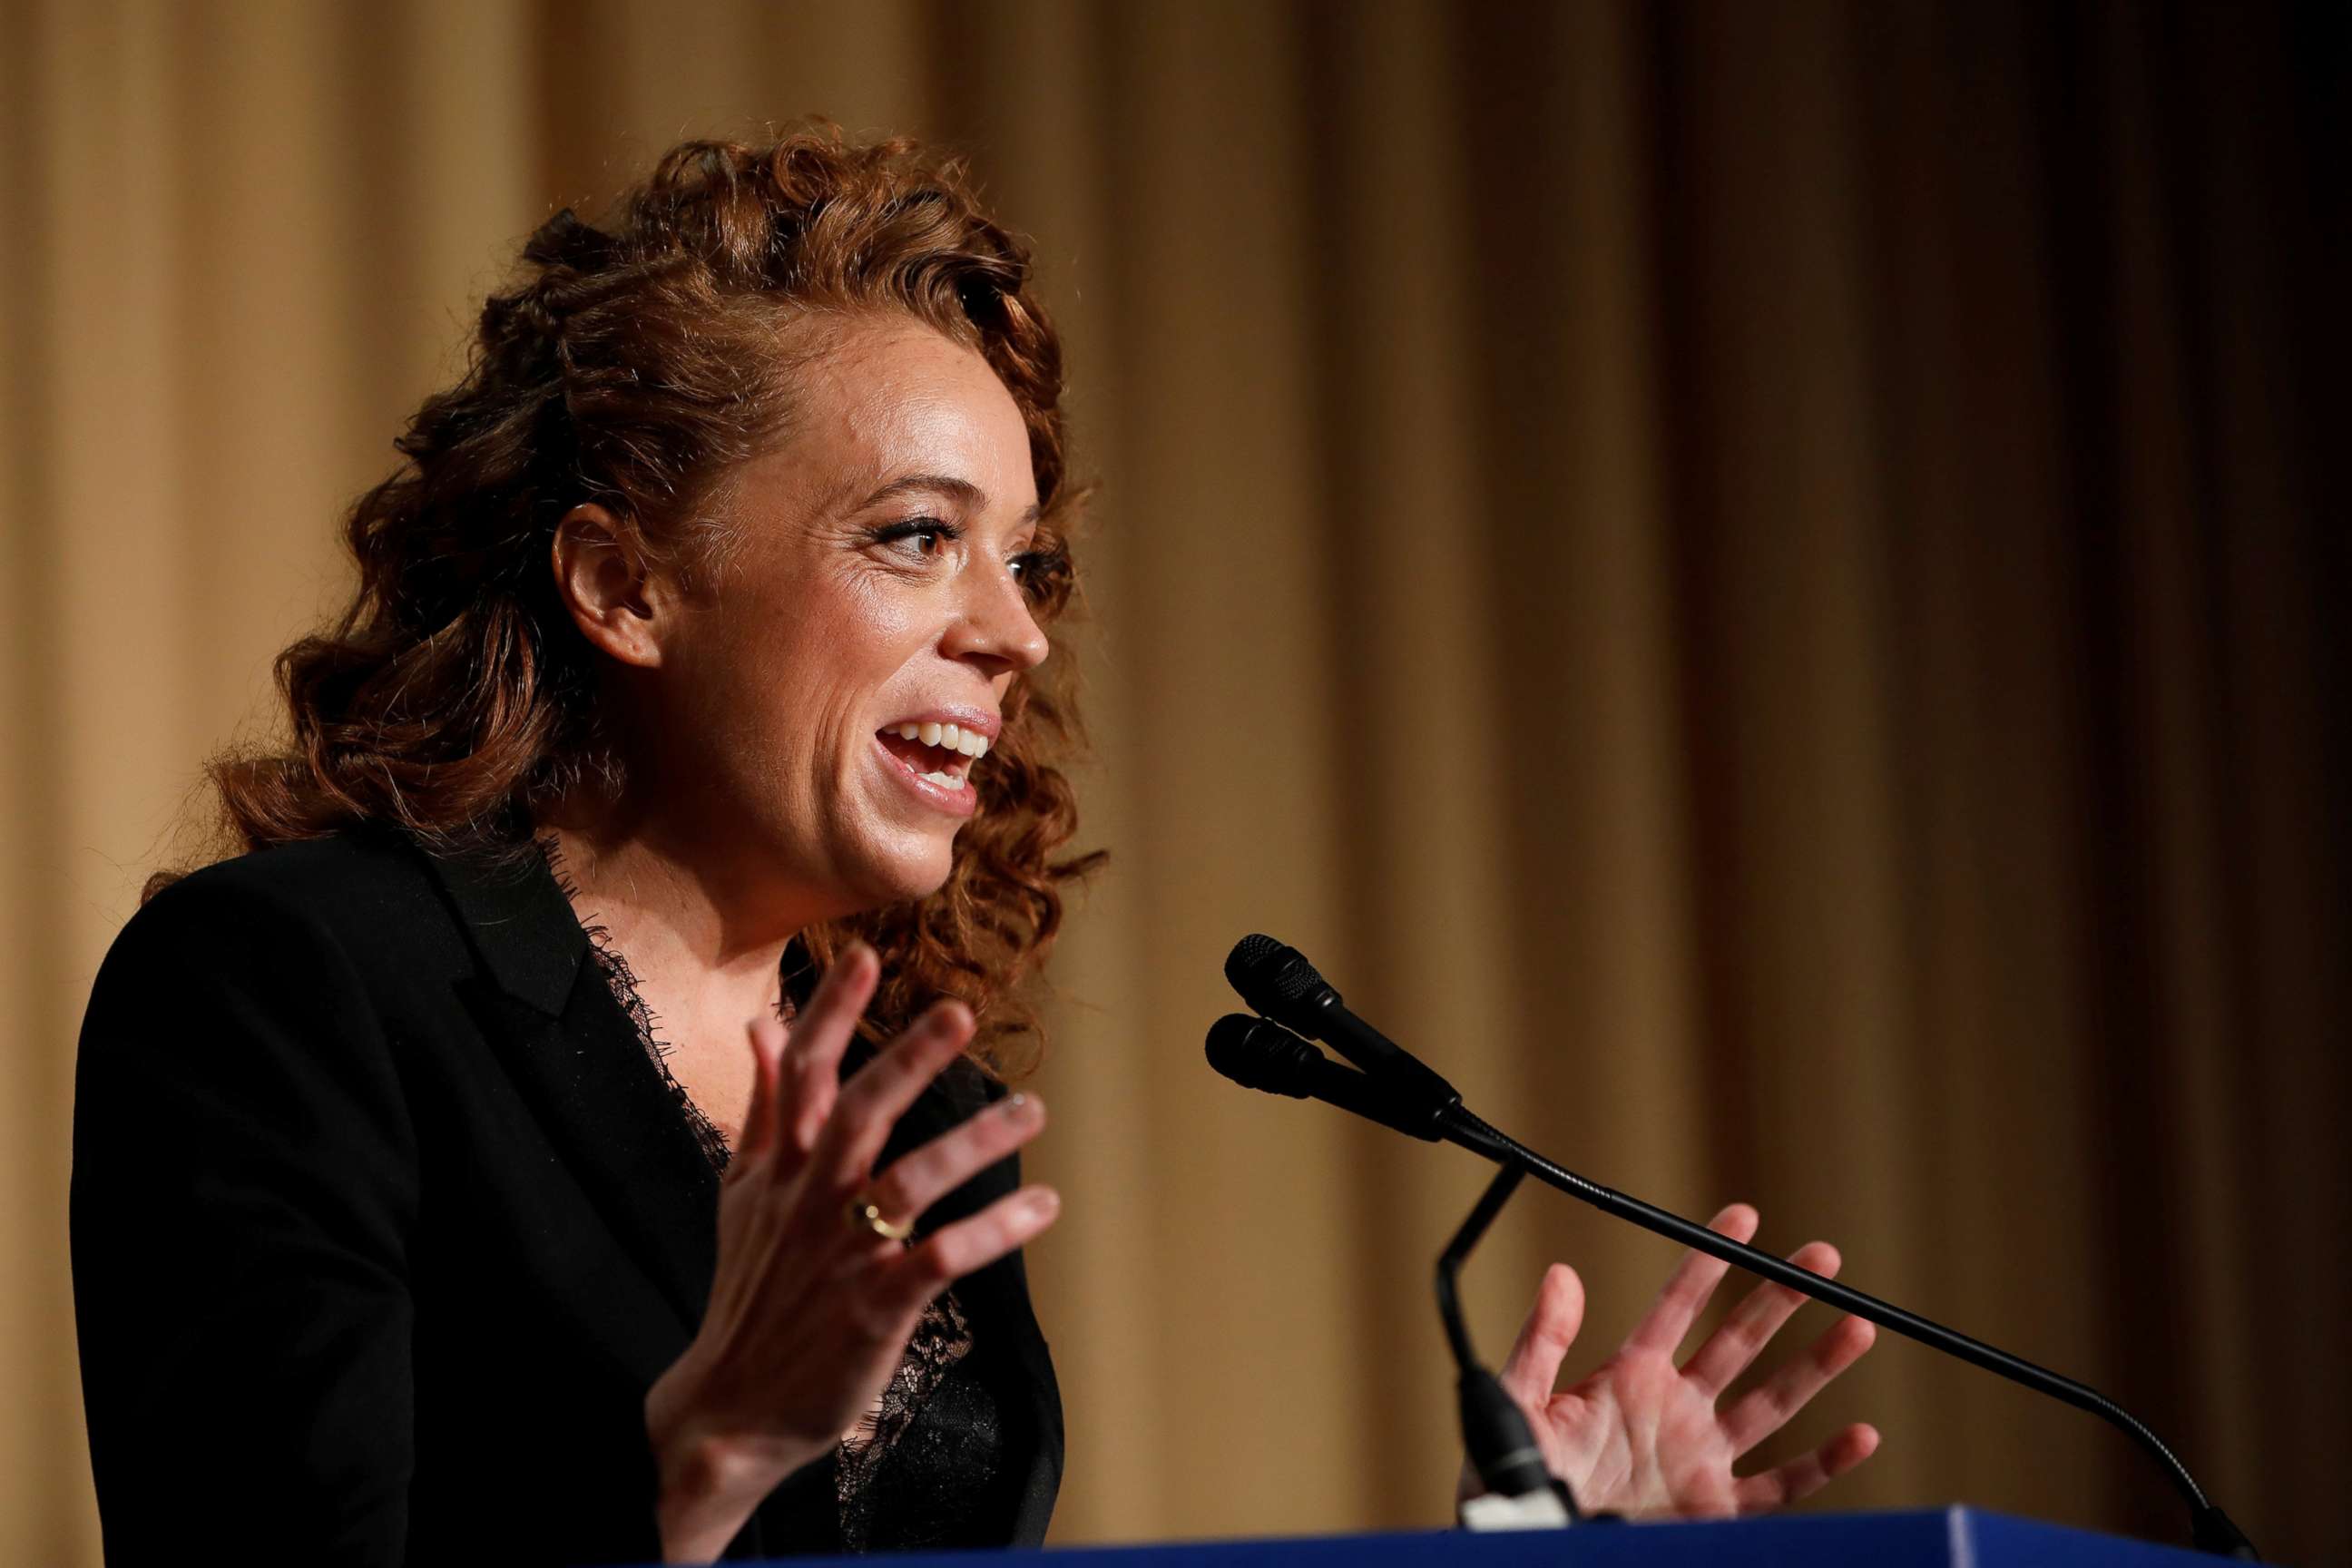 PHOTO: Comedian Michelle Wolf performs at the White House Correspondents' Association dinner in Washington, April 28, 2018.